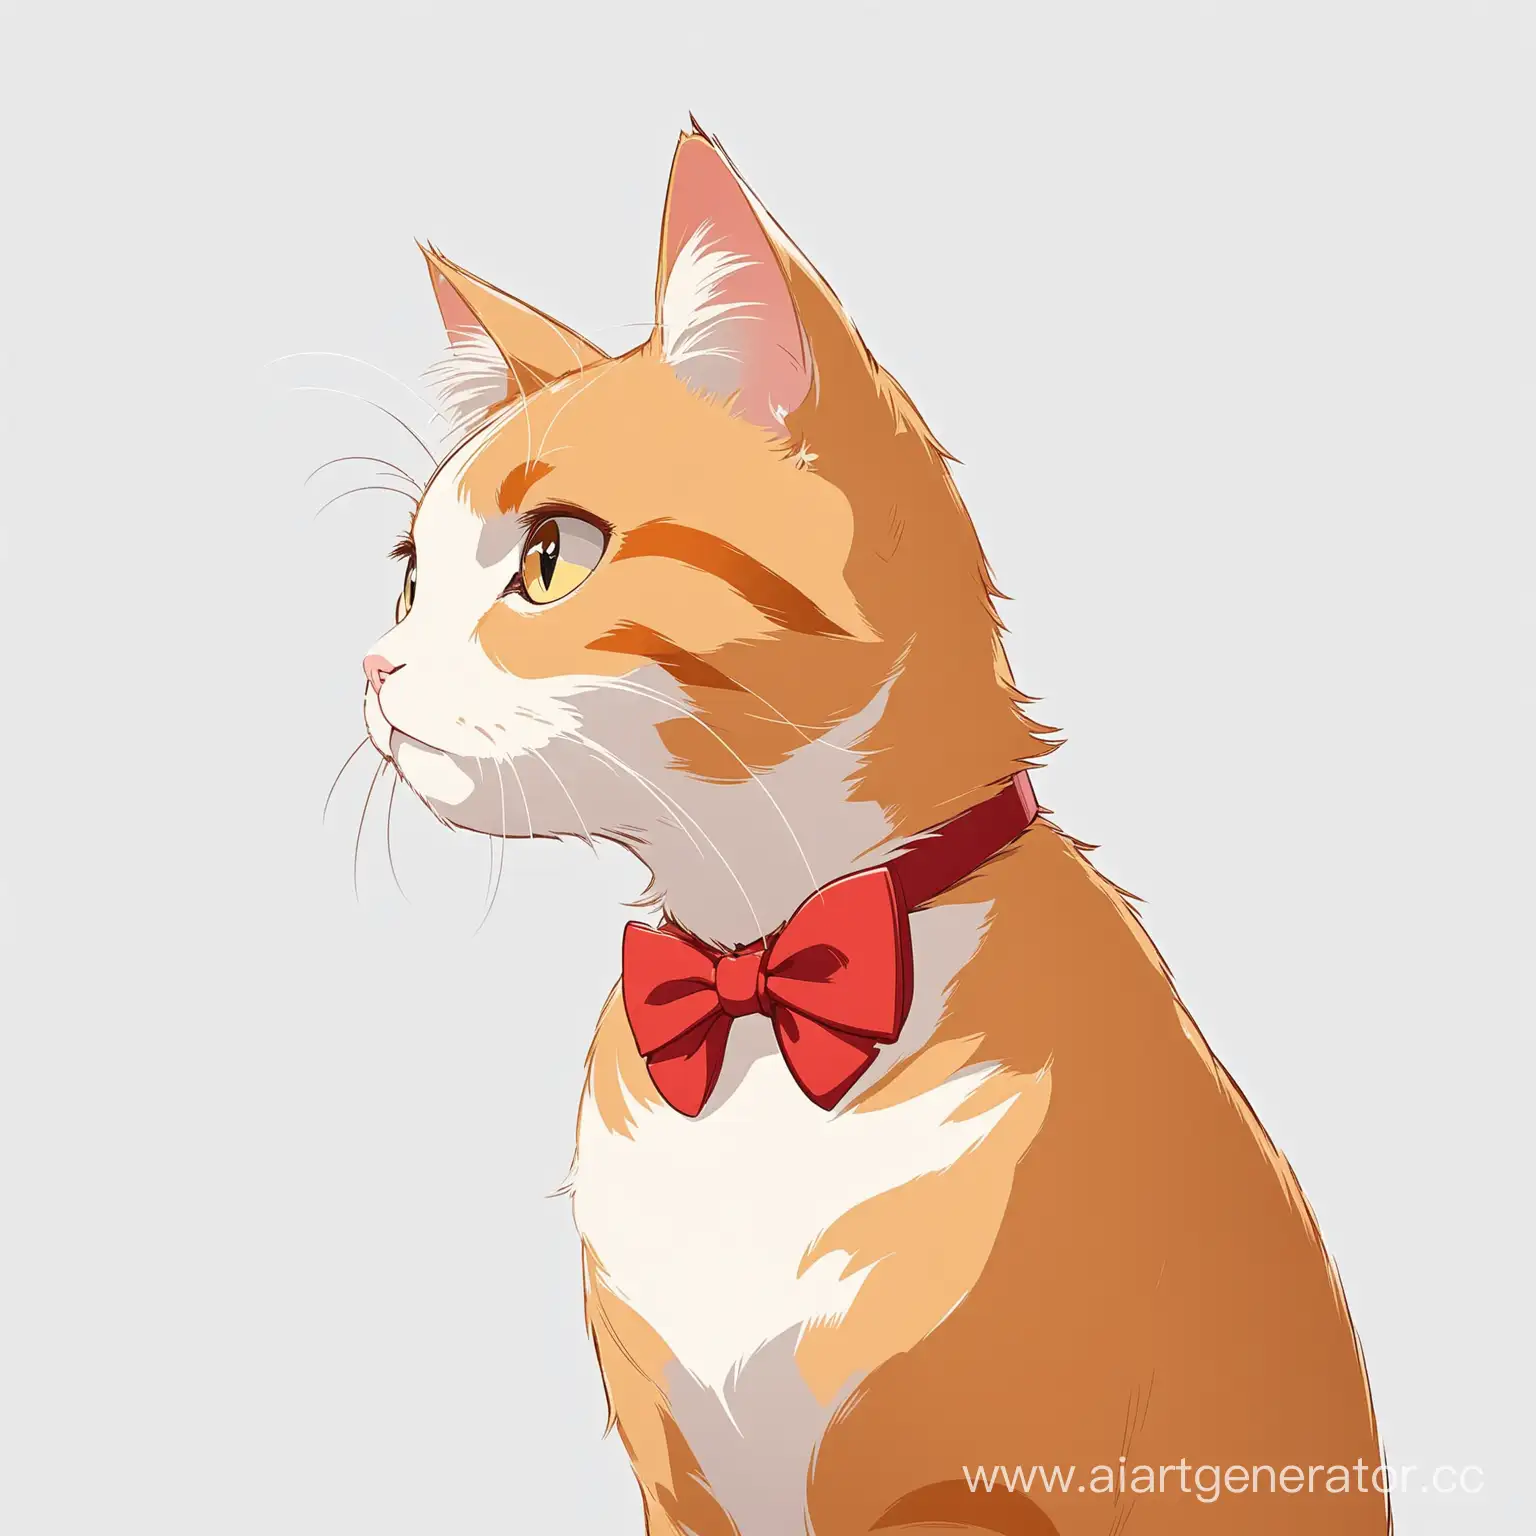 Charming-Cat-with-Red-Bow-Tie-on-White-Background